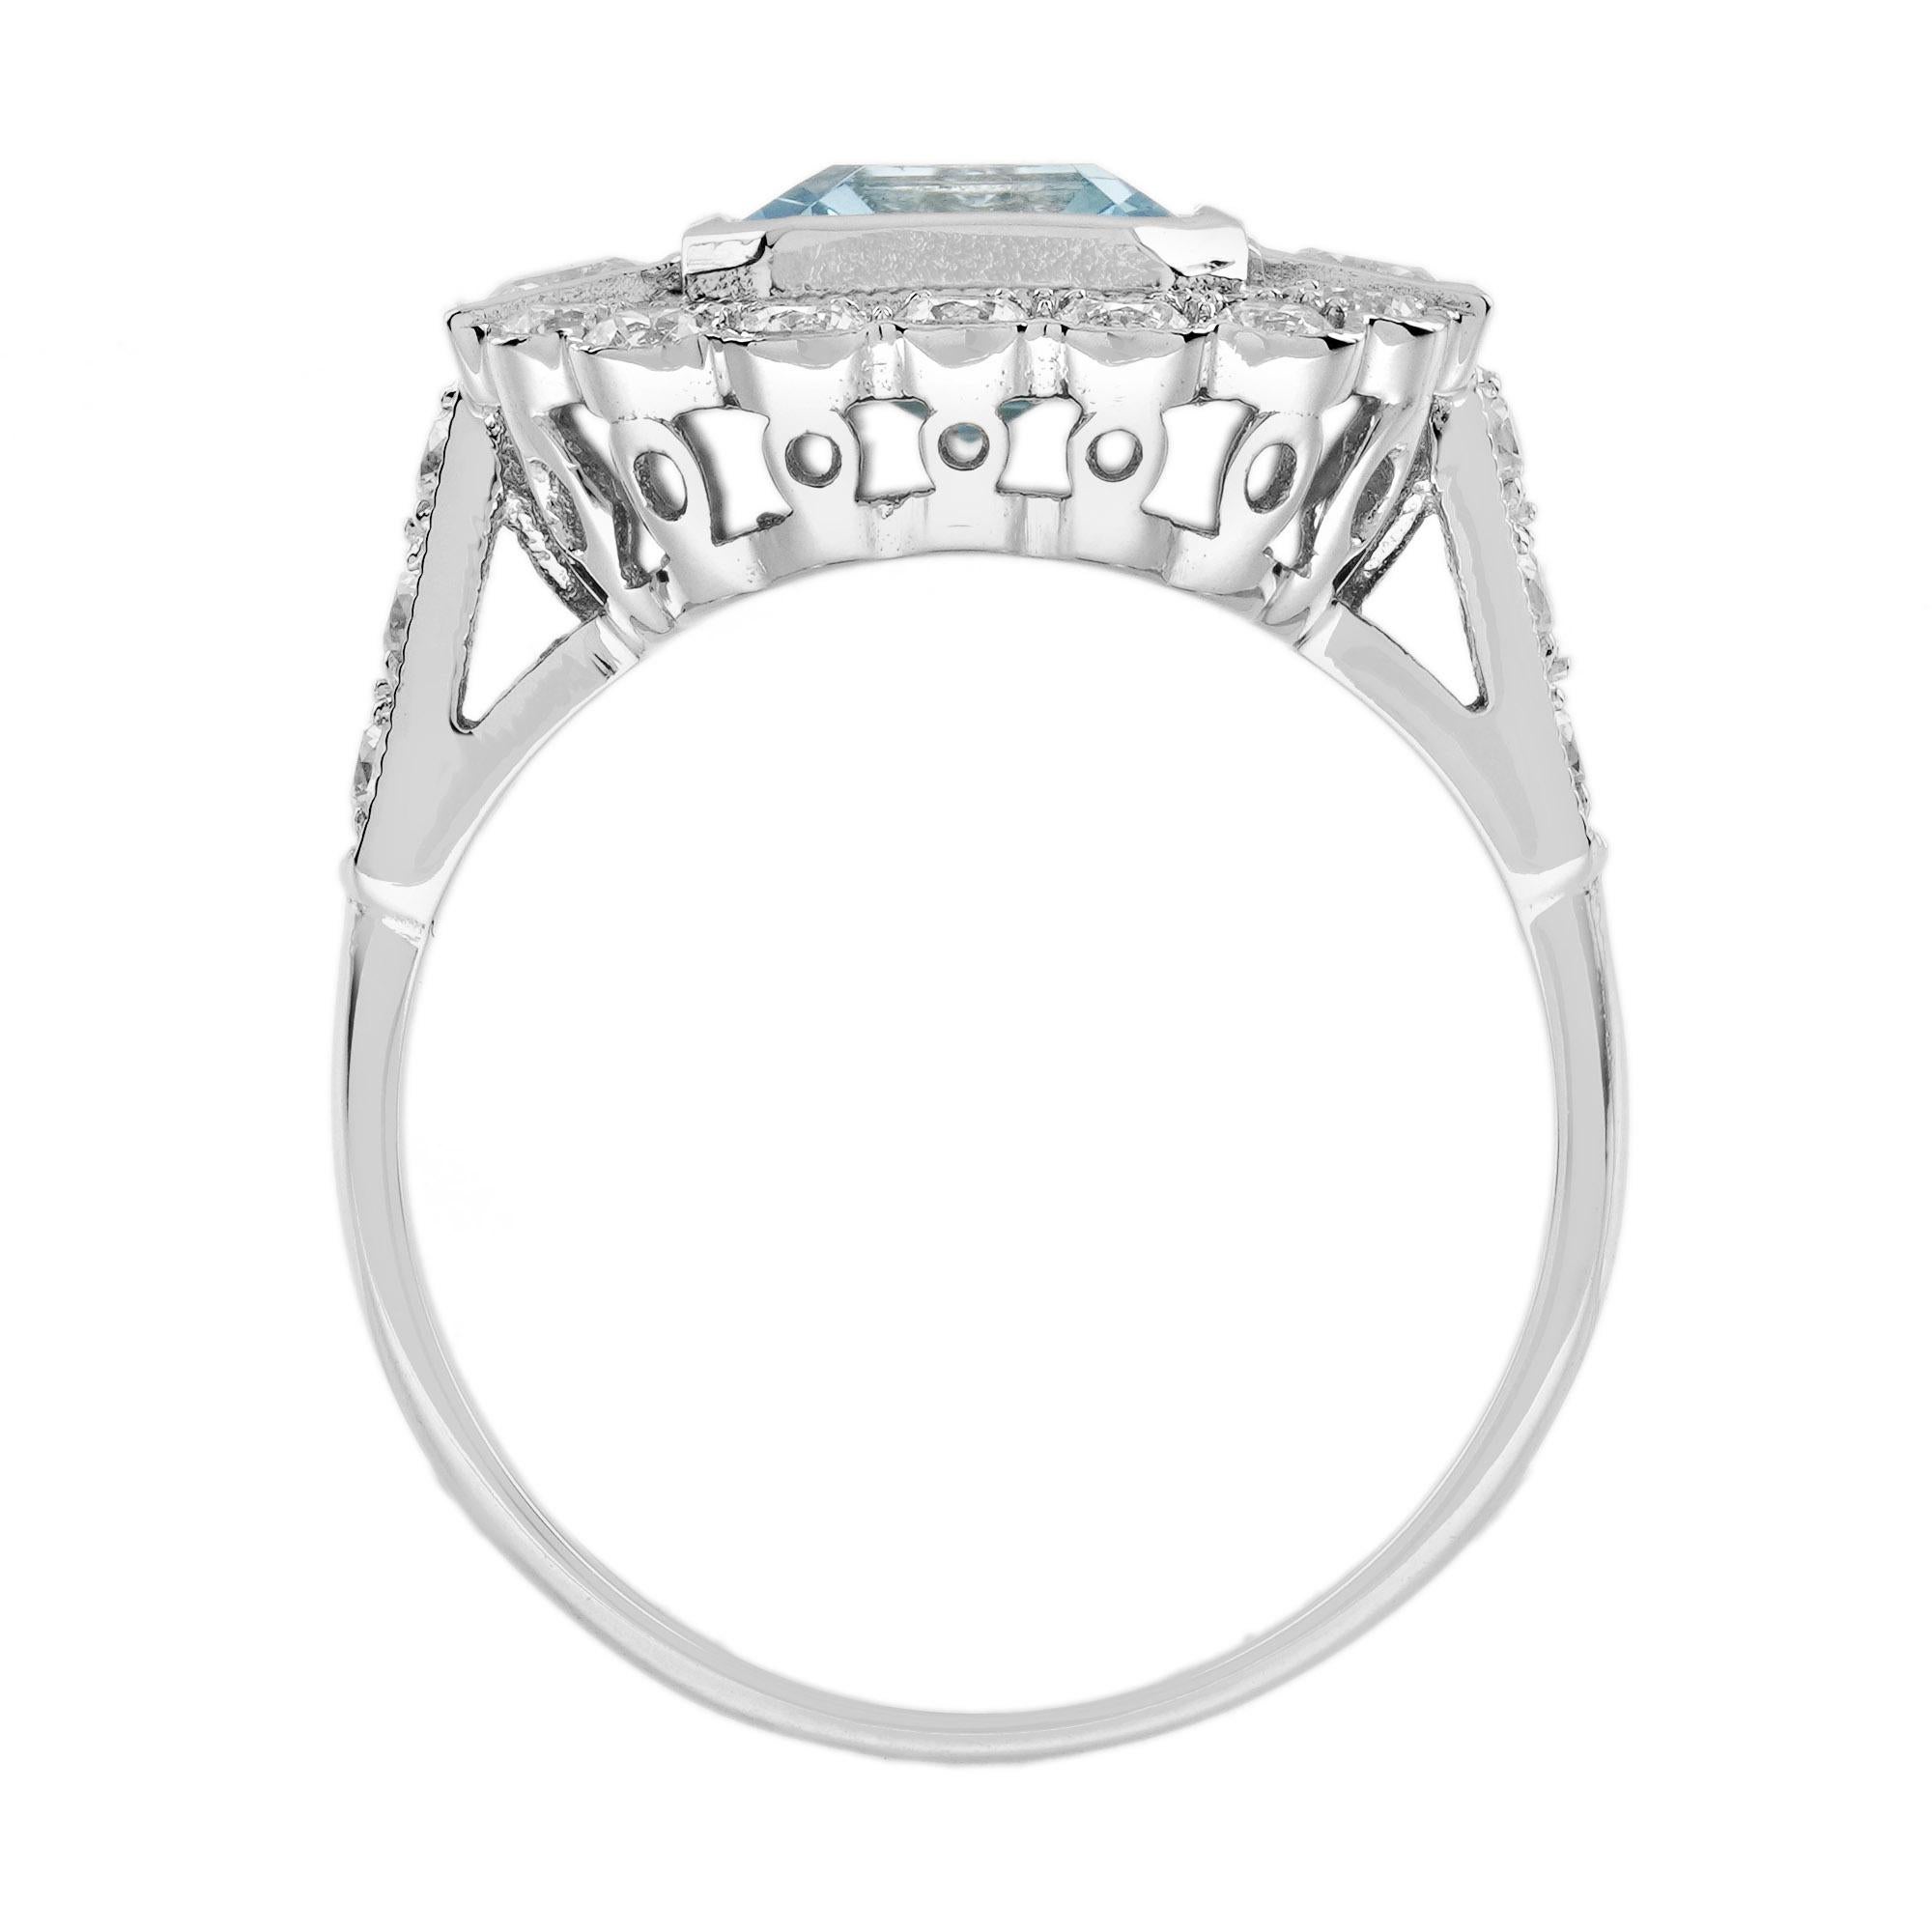 Aquamarine and Diamond Halo Art Deco Style Engagement Ring in 18K White Gold For Sale 1